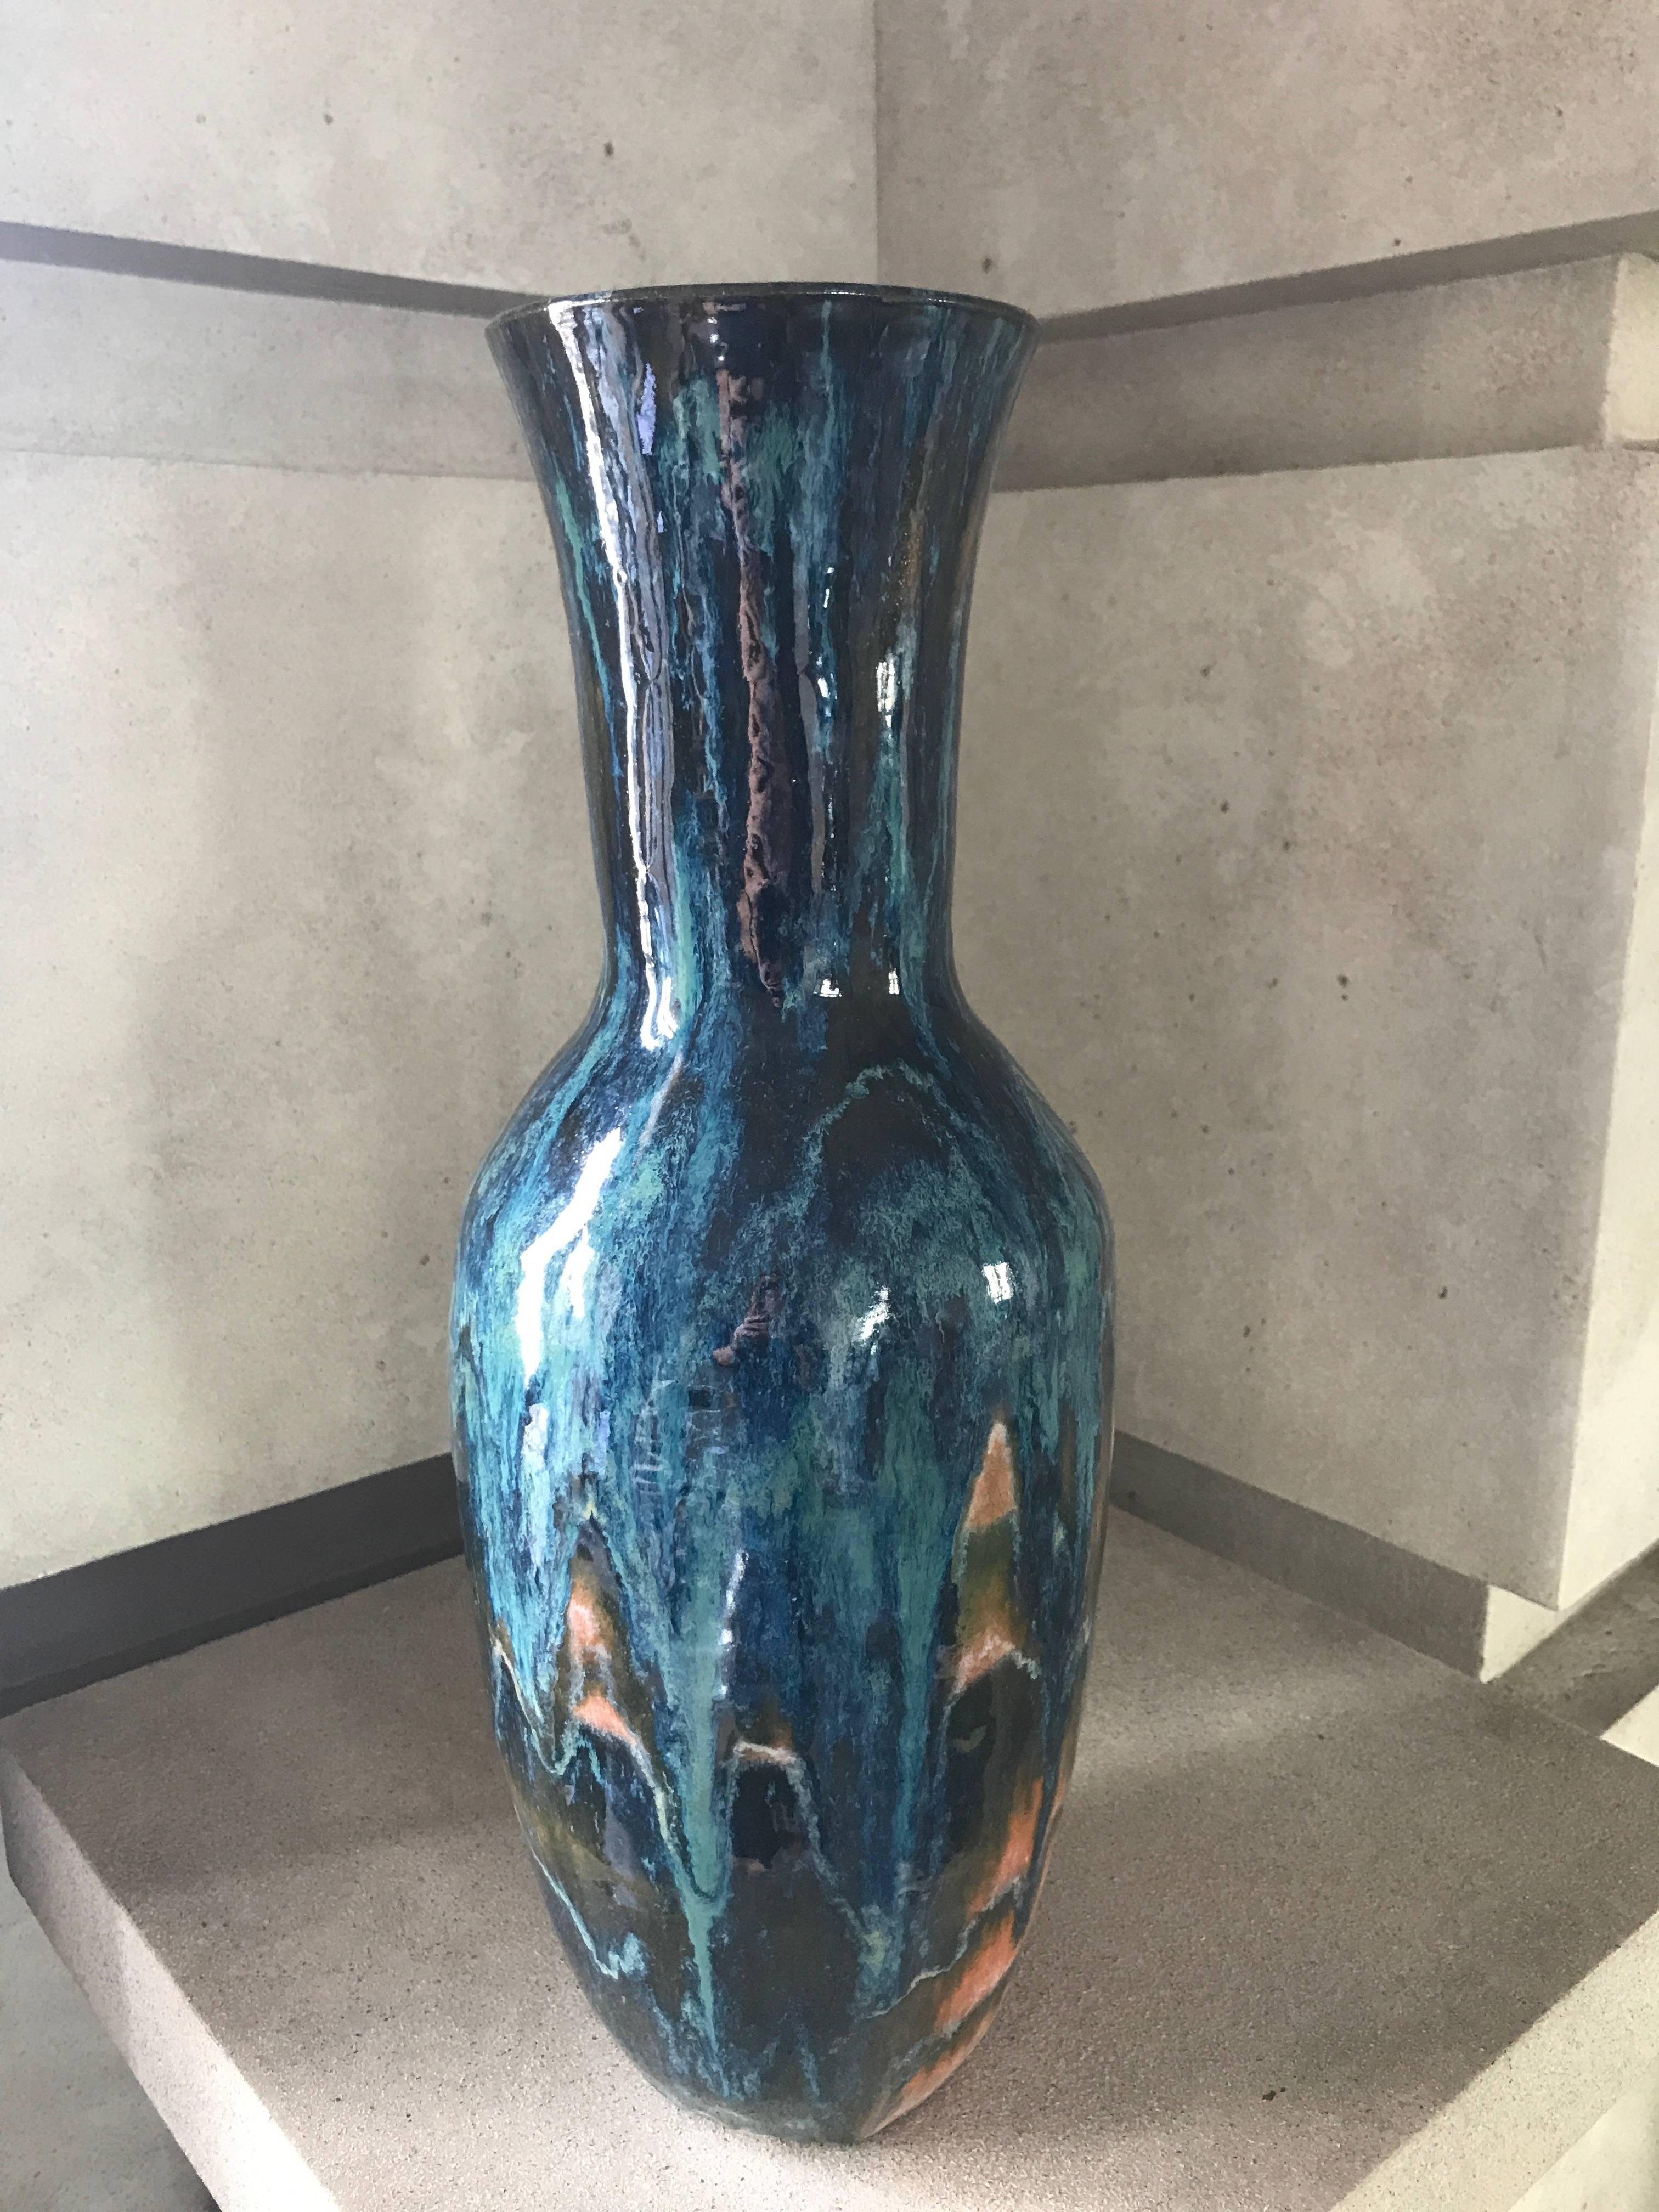 A handmade ceramic vase in a custom glaze featuring shades of navy, cobalt blue and apricot.
This stunning vase is suitable to be wired to become a lamp.
This contemporary vase has been custom designed and makes a sensational statement piece.